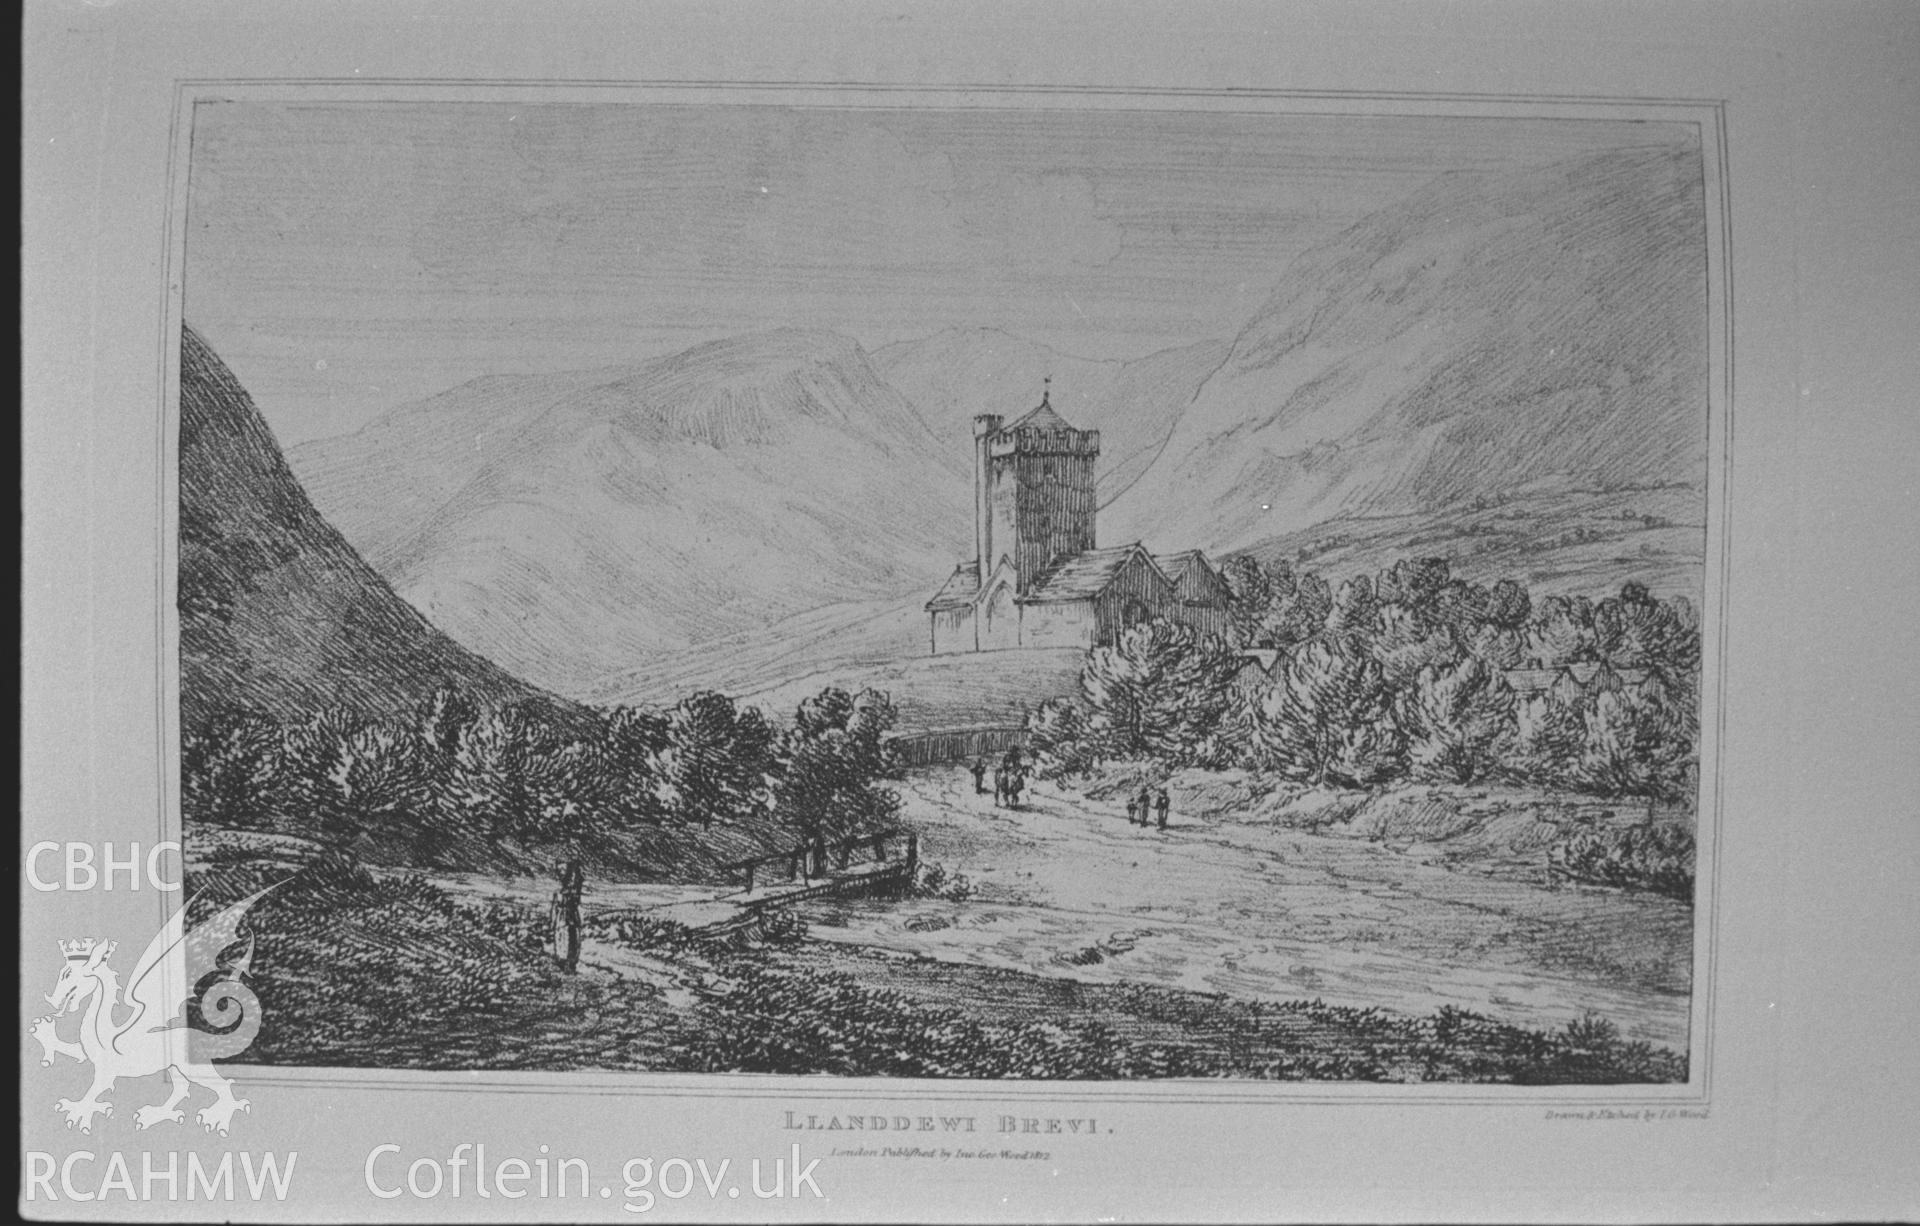 'Llanddewi Brevi' drawn and engraved by J. G. Woods, c.1810. Photographed by Arthur O. Chater in January 1968 for his own private research.